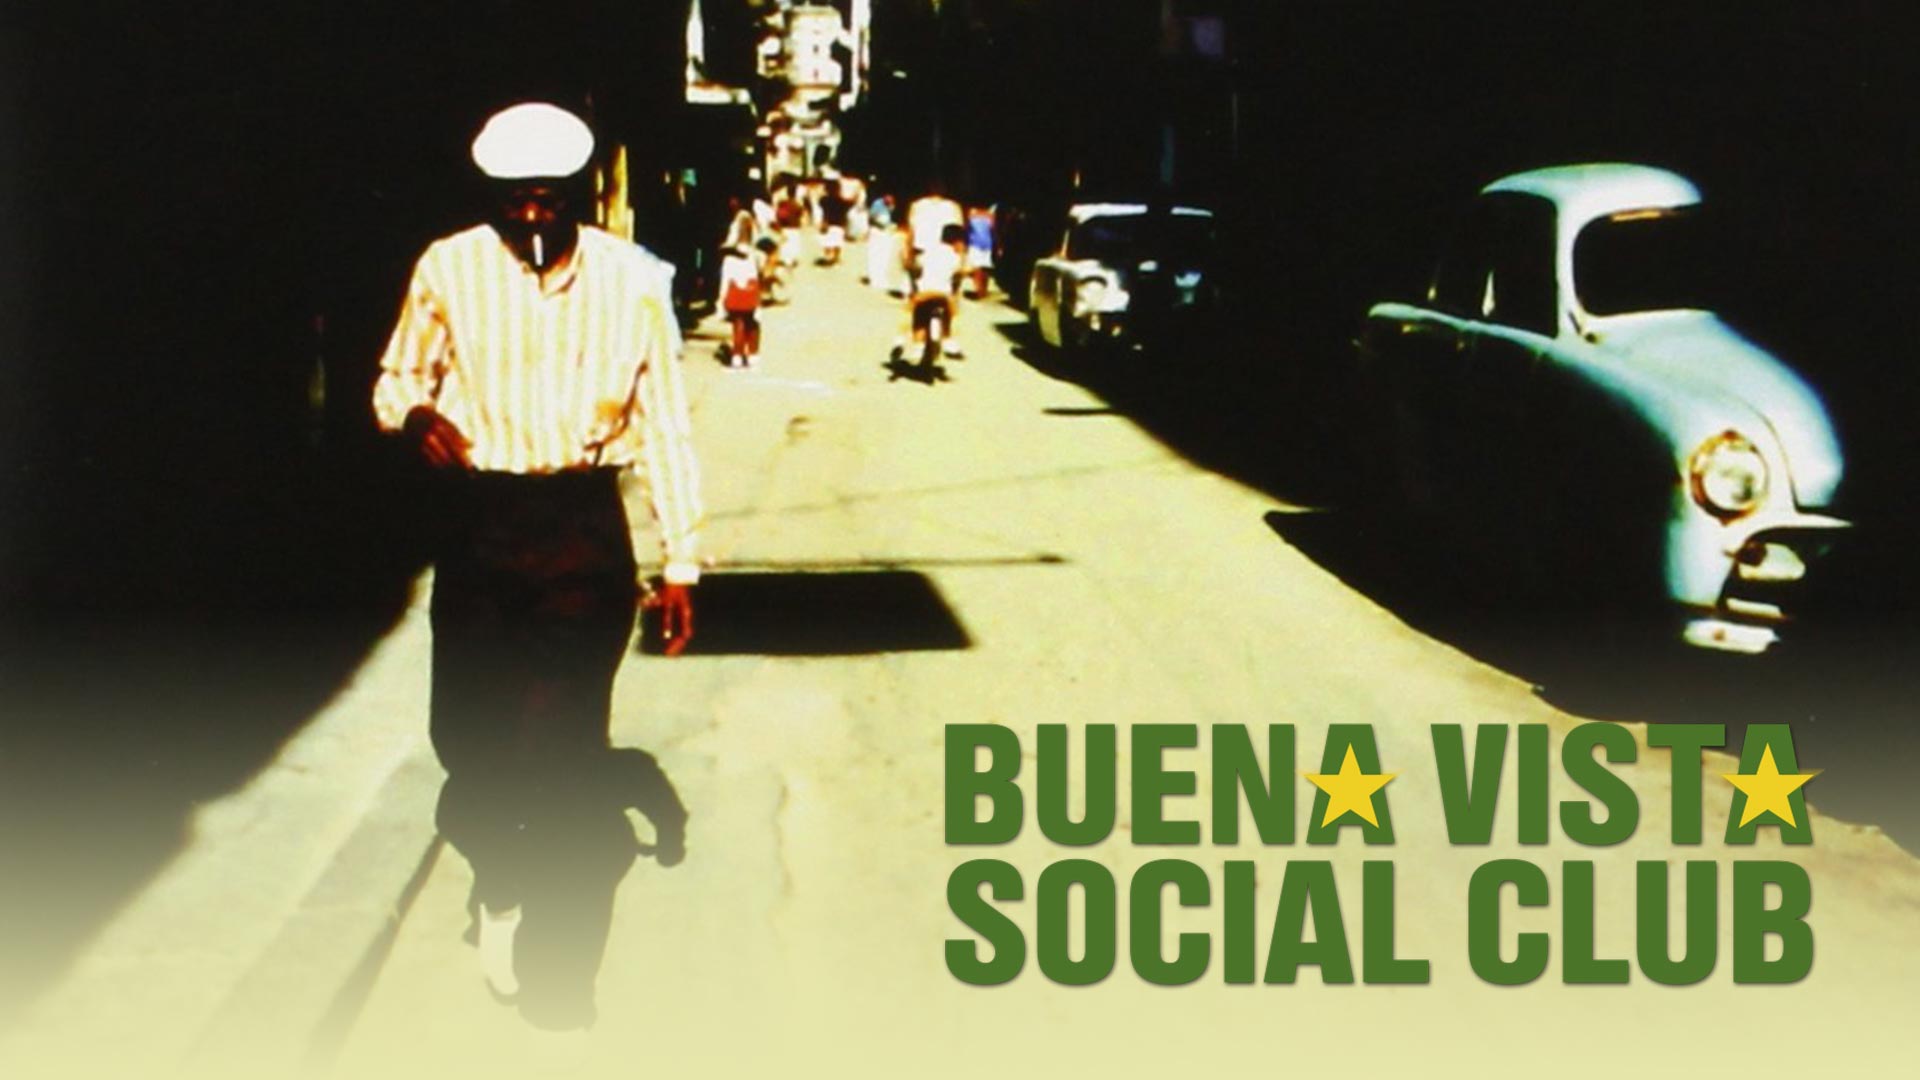 46-facts-about-the-movie-buena-vista-social-club